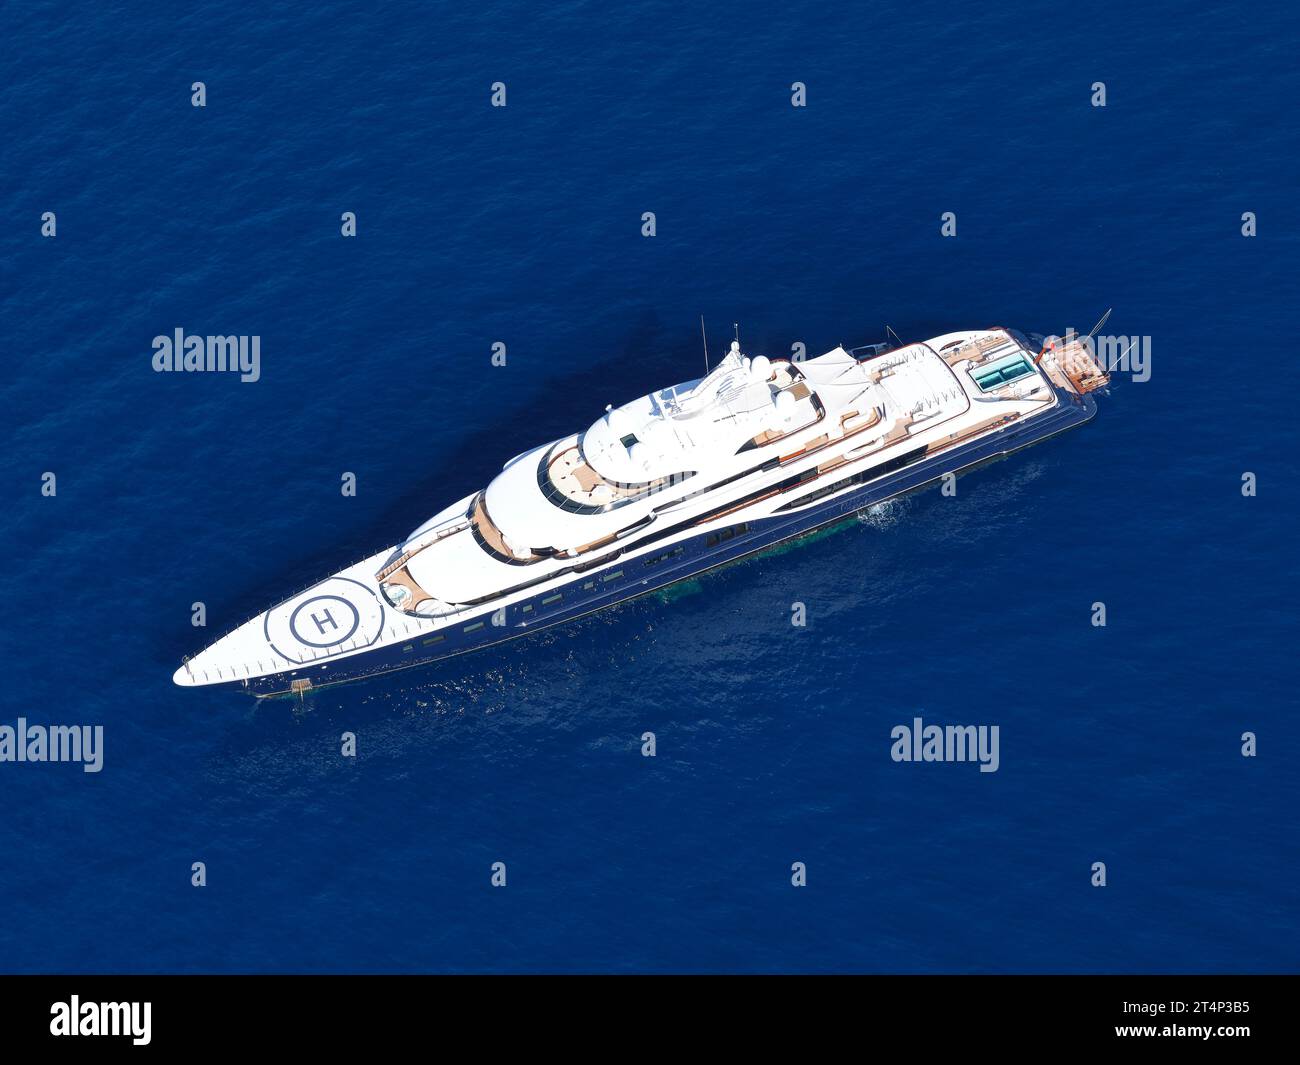 AERIAL VIEW. Symphony yacht (101-meter-long) anchored in the Bay of Roquebrune off the coast of Monaco. Stock Photo